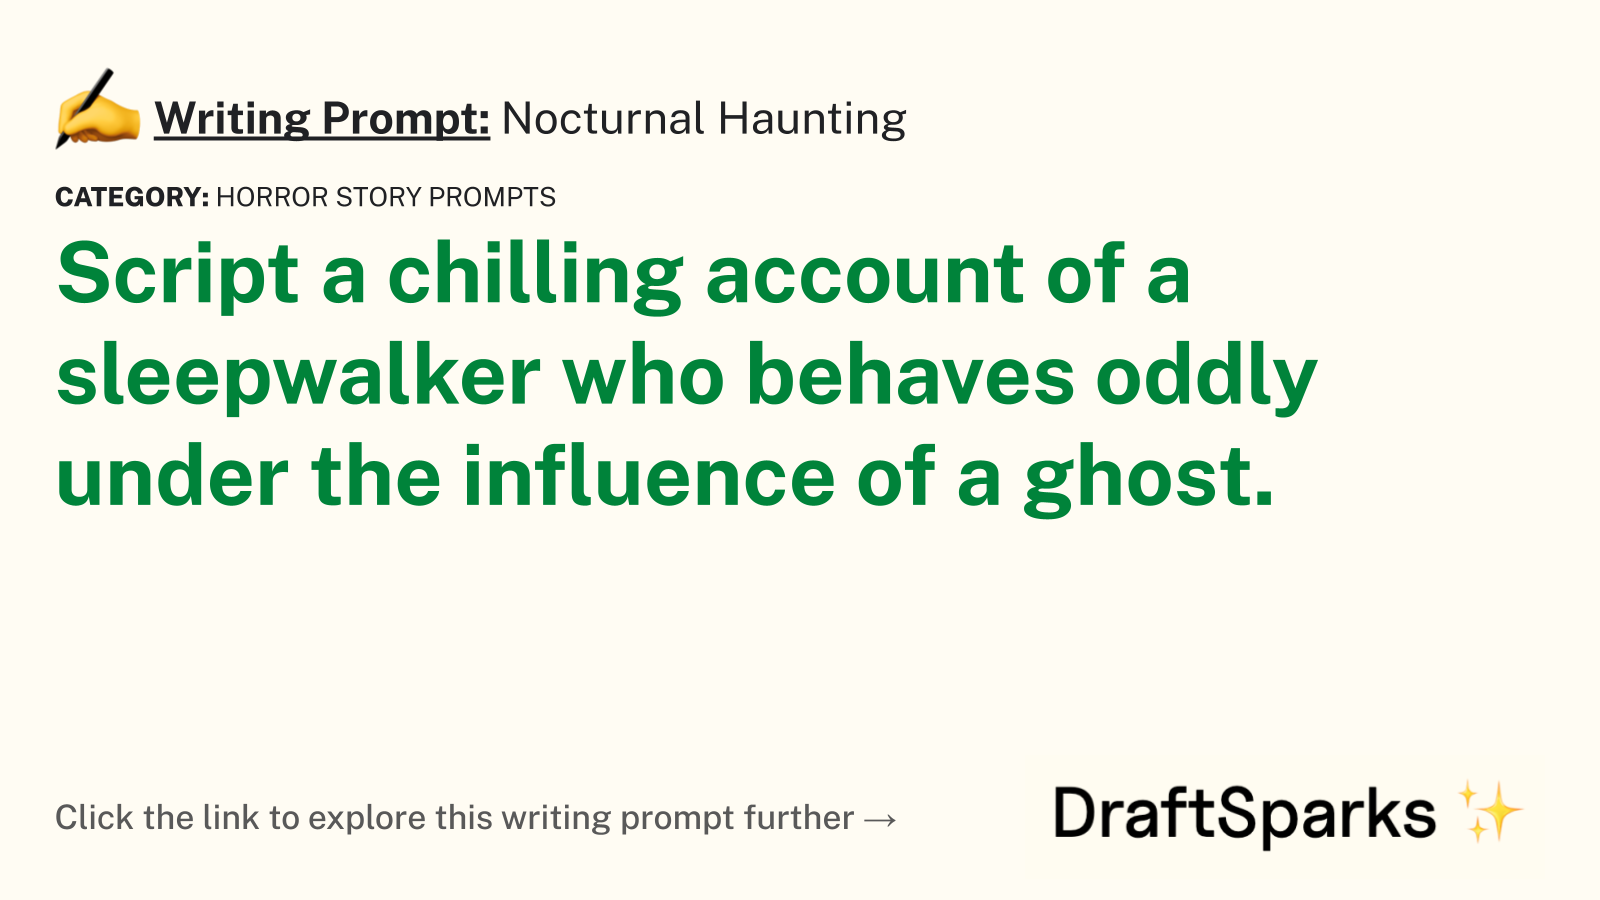 Nocturnal Haunting